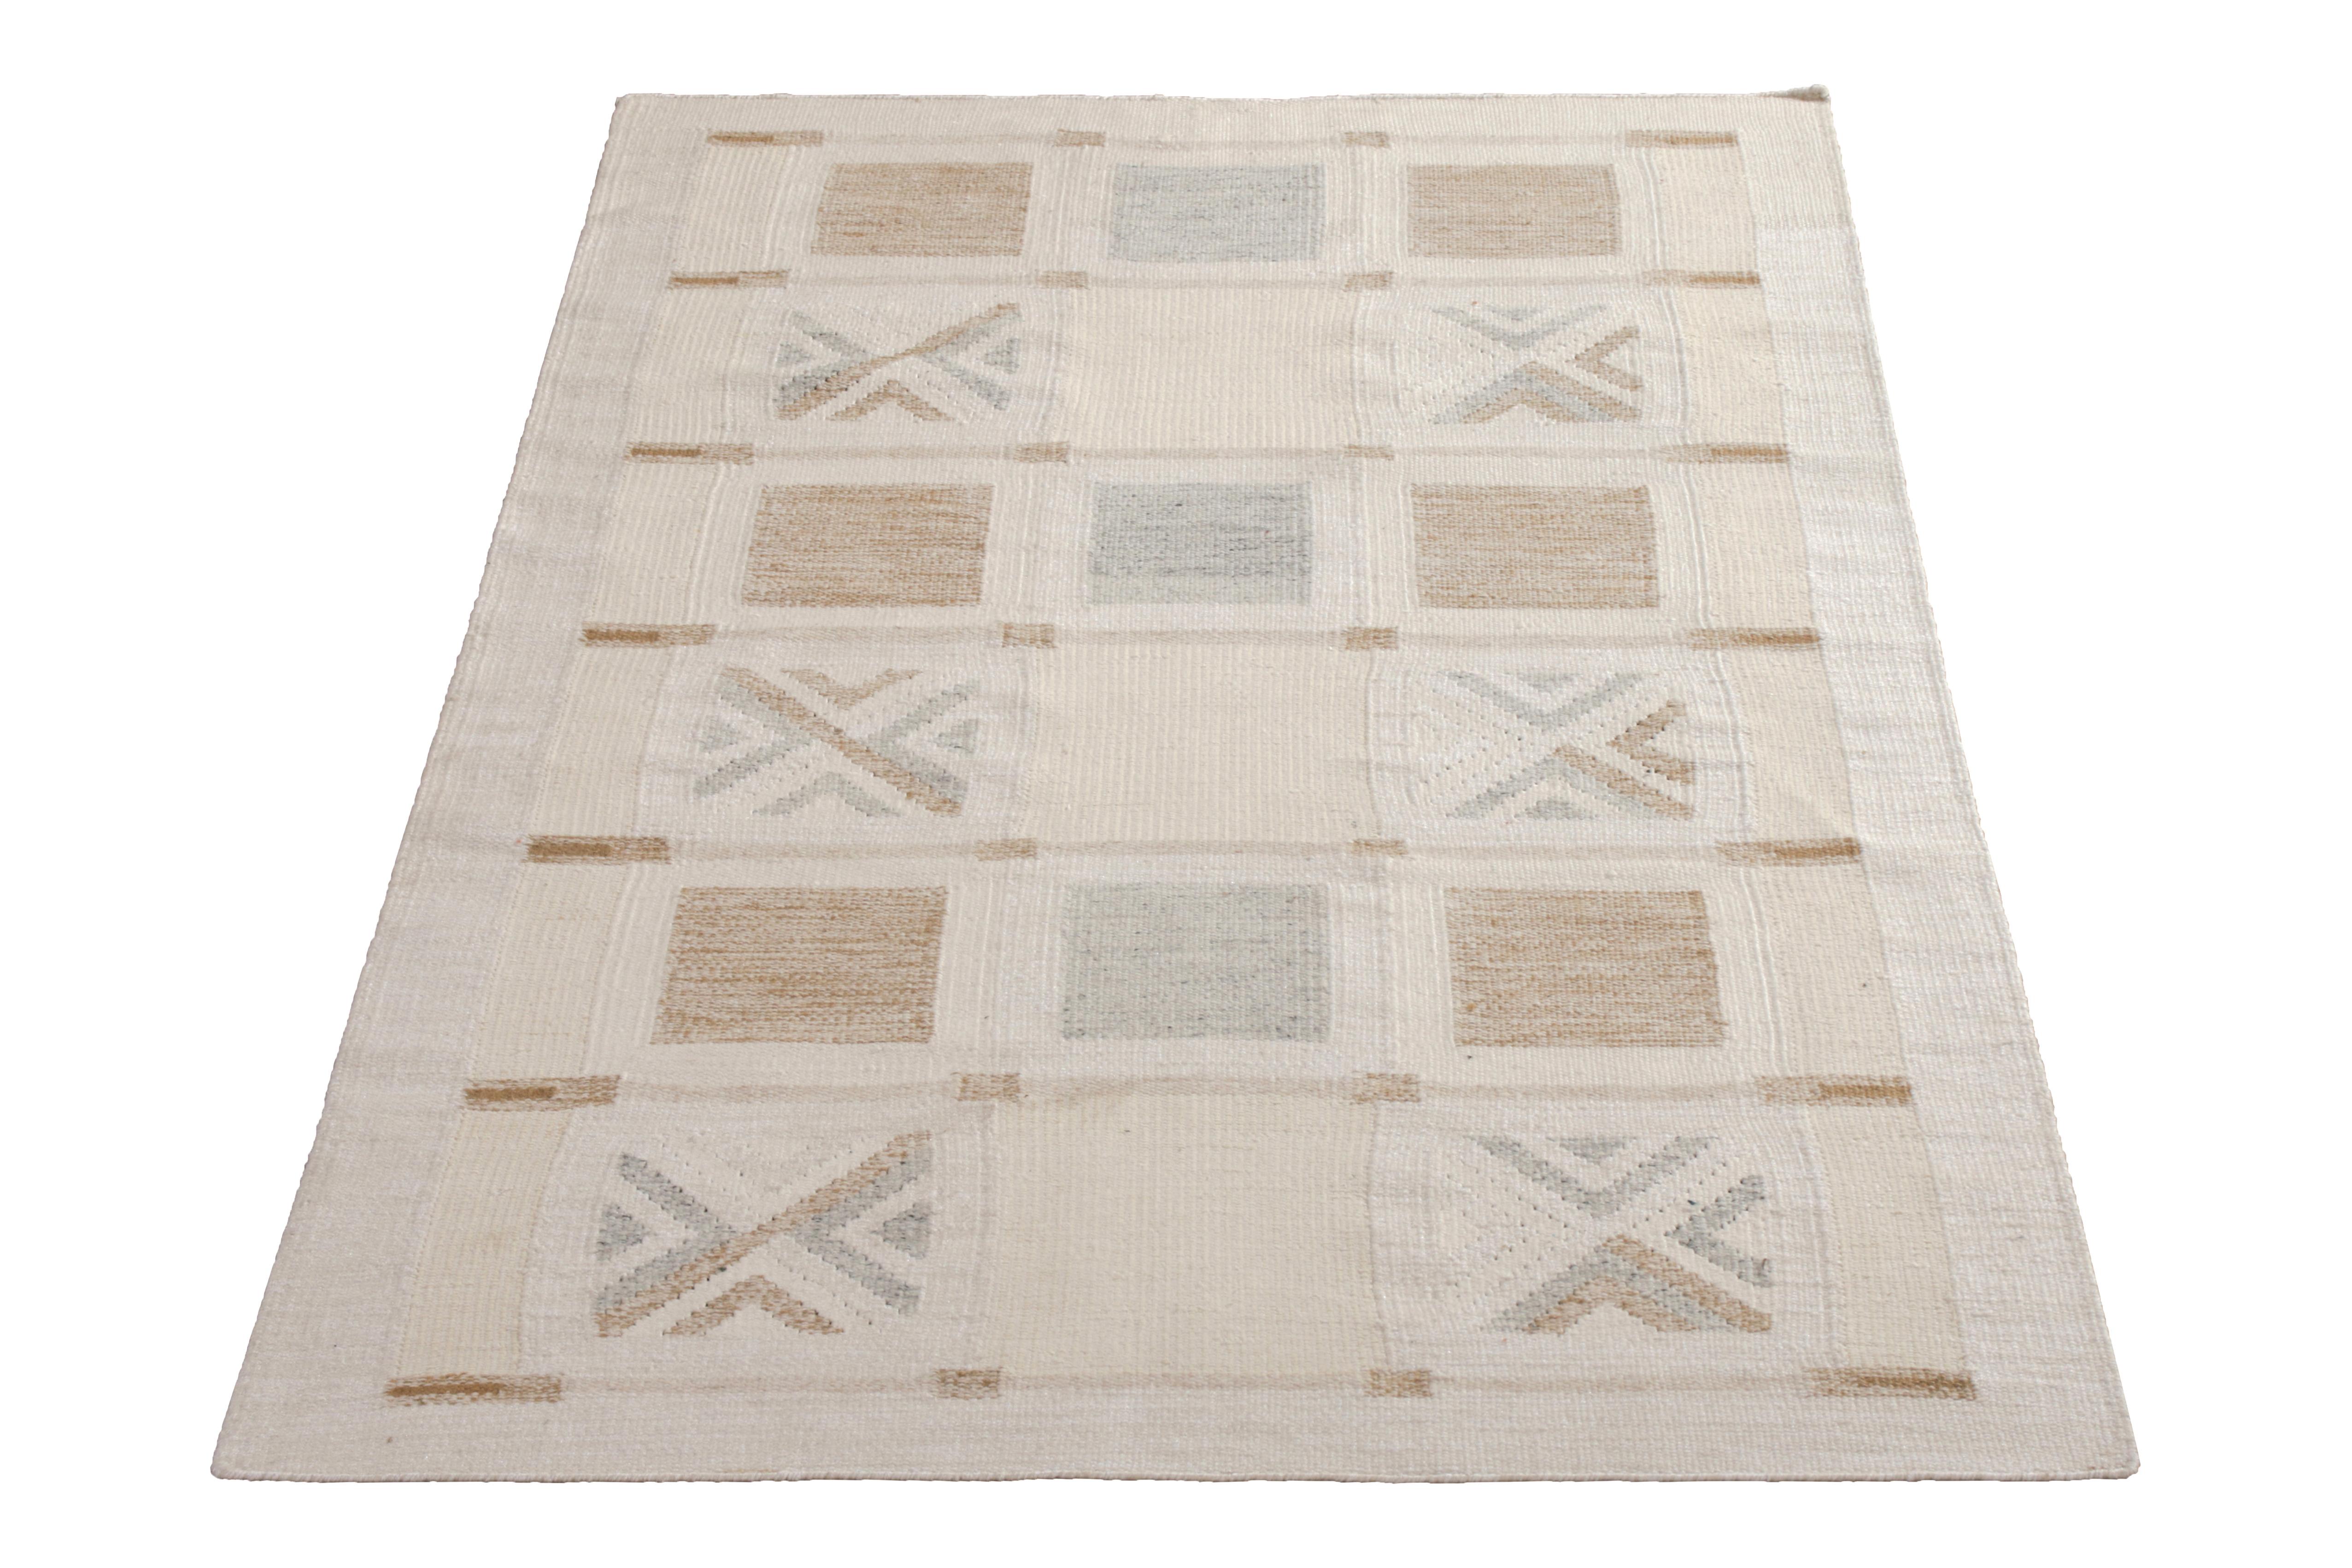 Handmade in flat-woven wool, this modern flat weave is an addition to the reputed Scandinavian Kilim collection by Rug & Kilim, celebrating the mid-century Scandinavian rug style in a unique approach to recapturing vintage colorways with